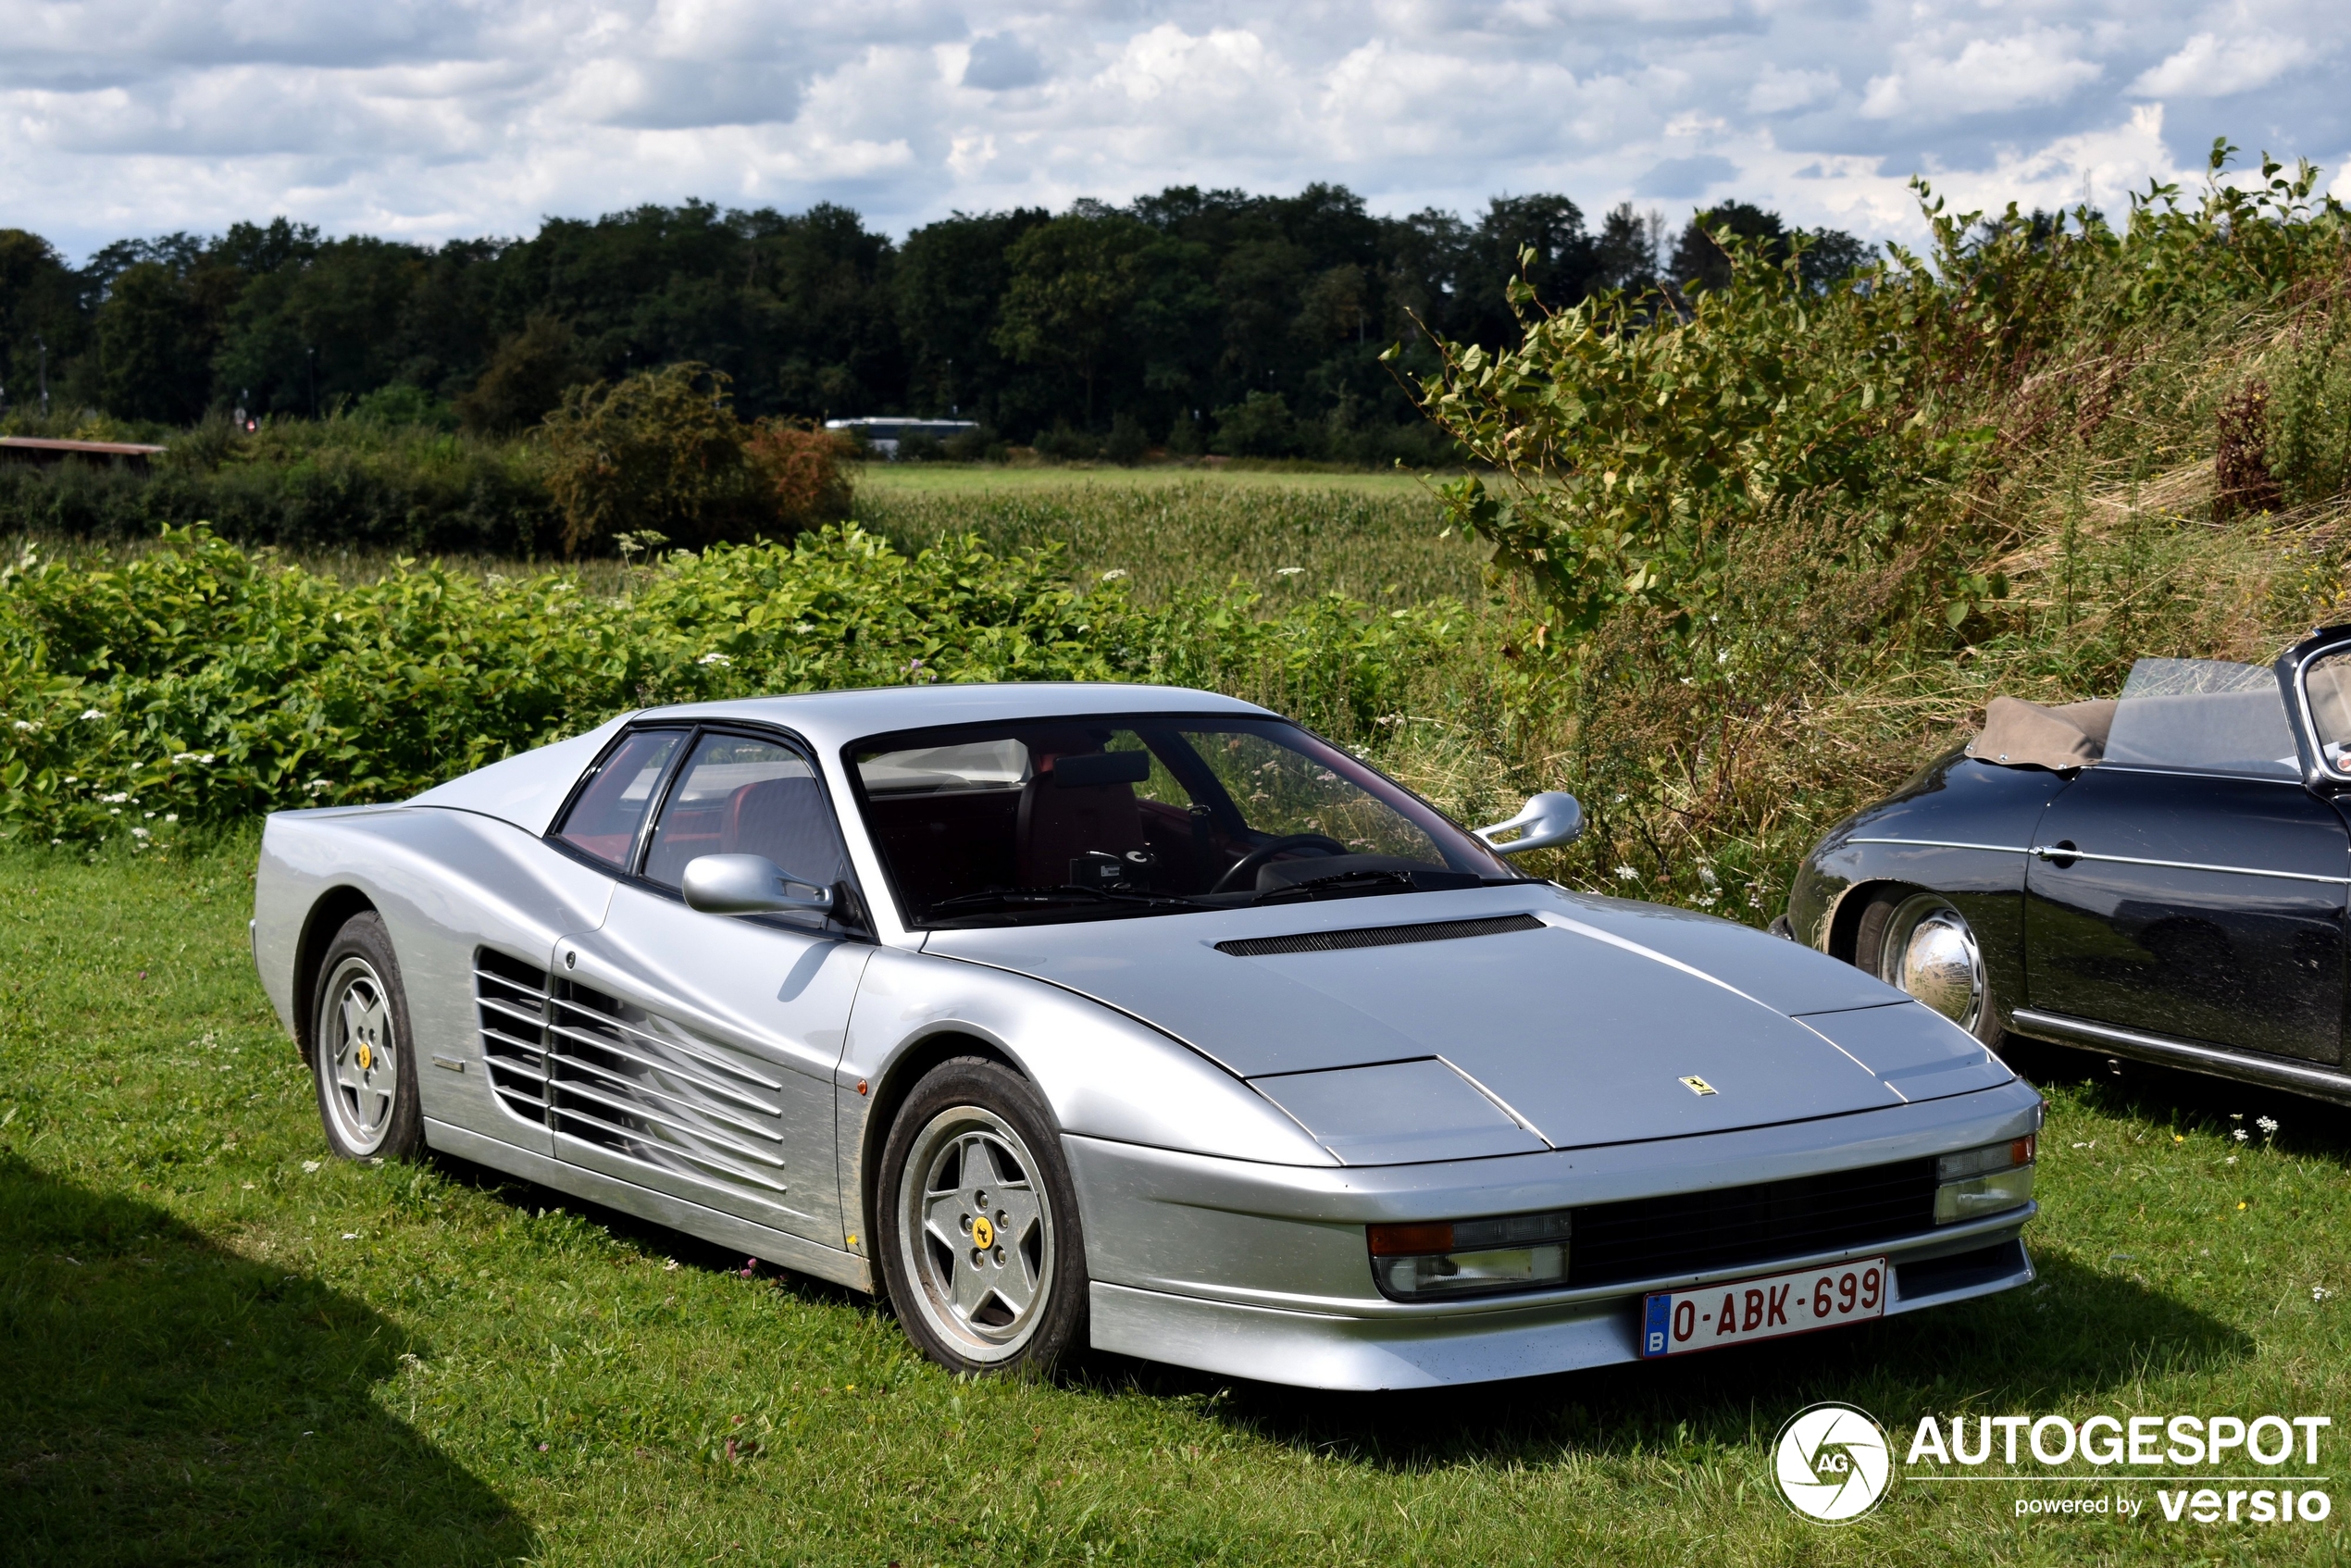 Did the Testarossa have a V-engine or a flat engine?